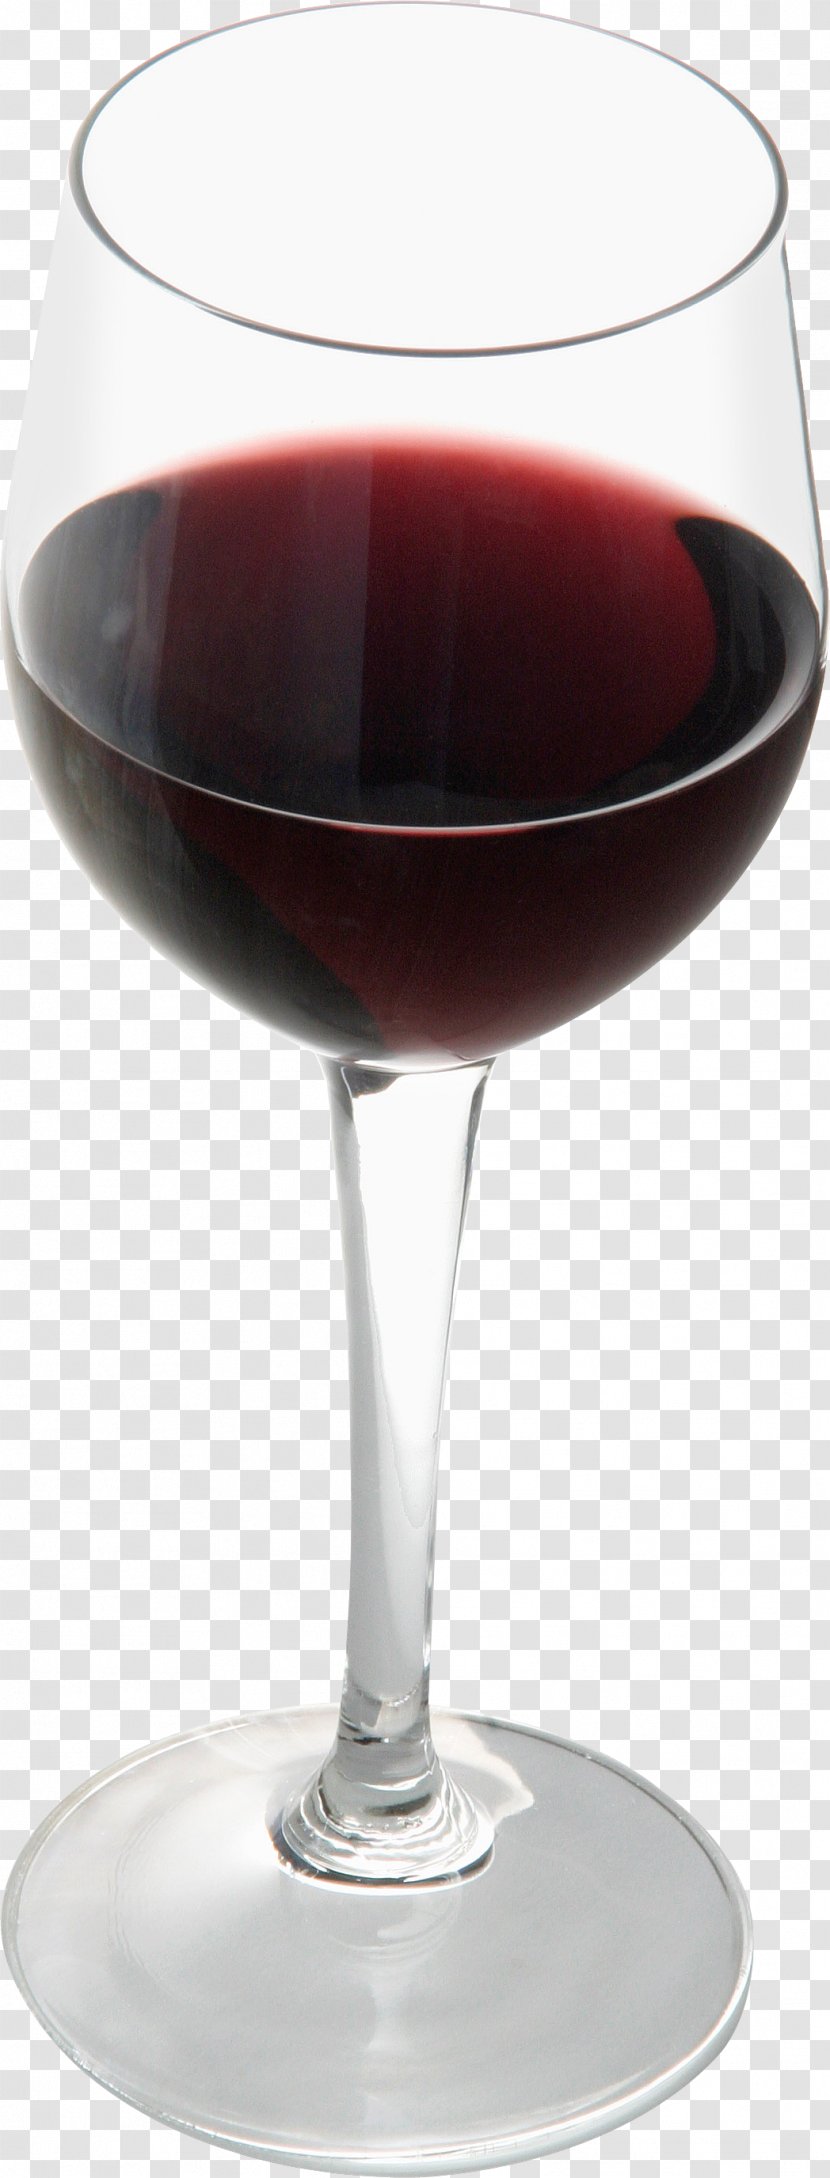 Red Wine The Glass Of Champagne Cabernet Sauvignon - Image Transparent PNG